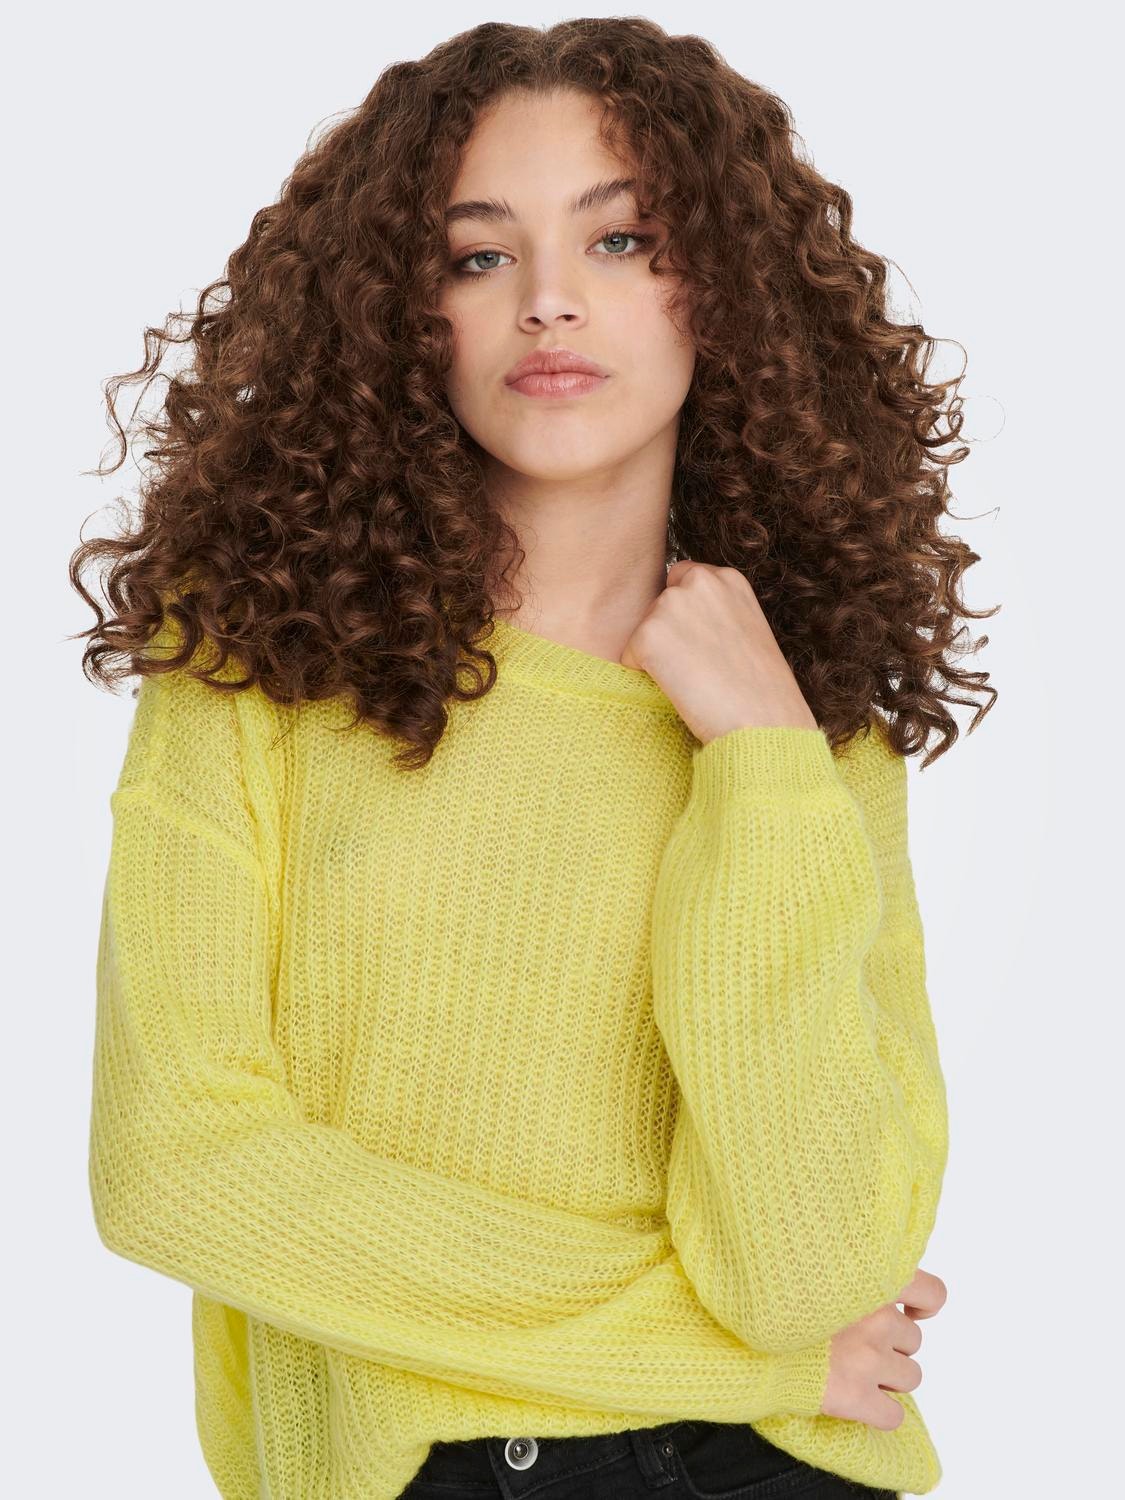 ONLY O-neck knitted pullover -Yellow Cream - 15211499